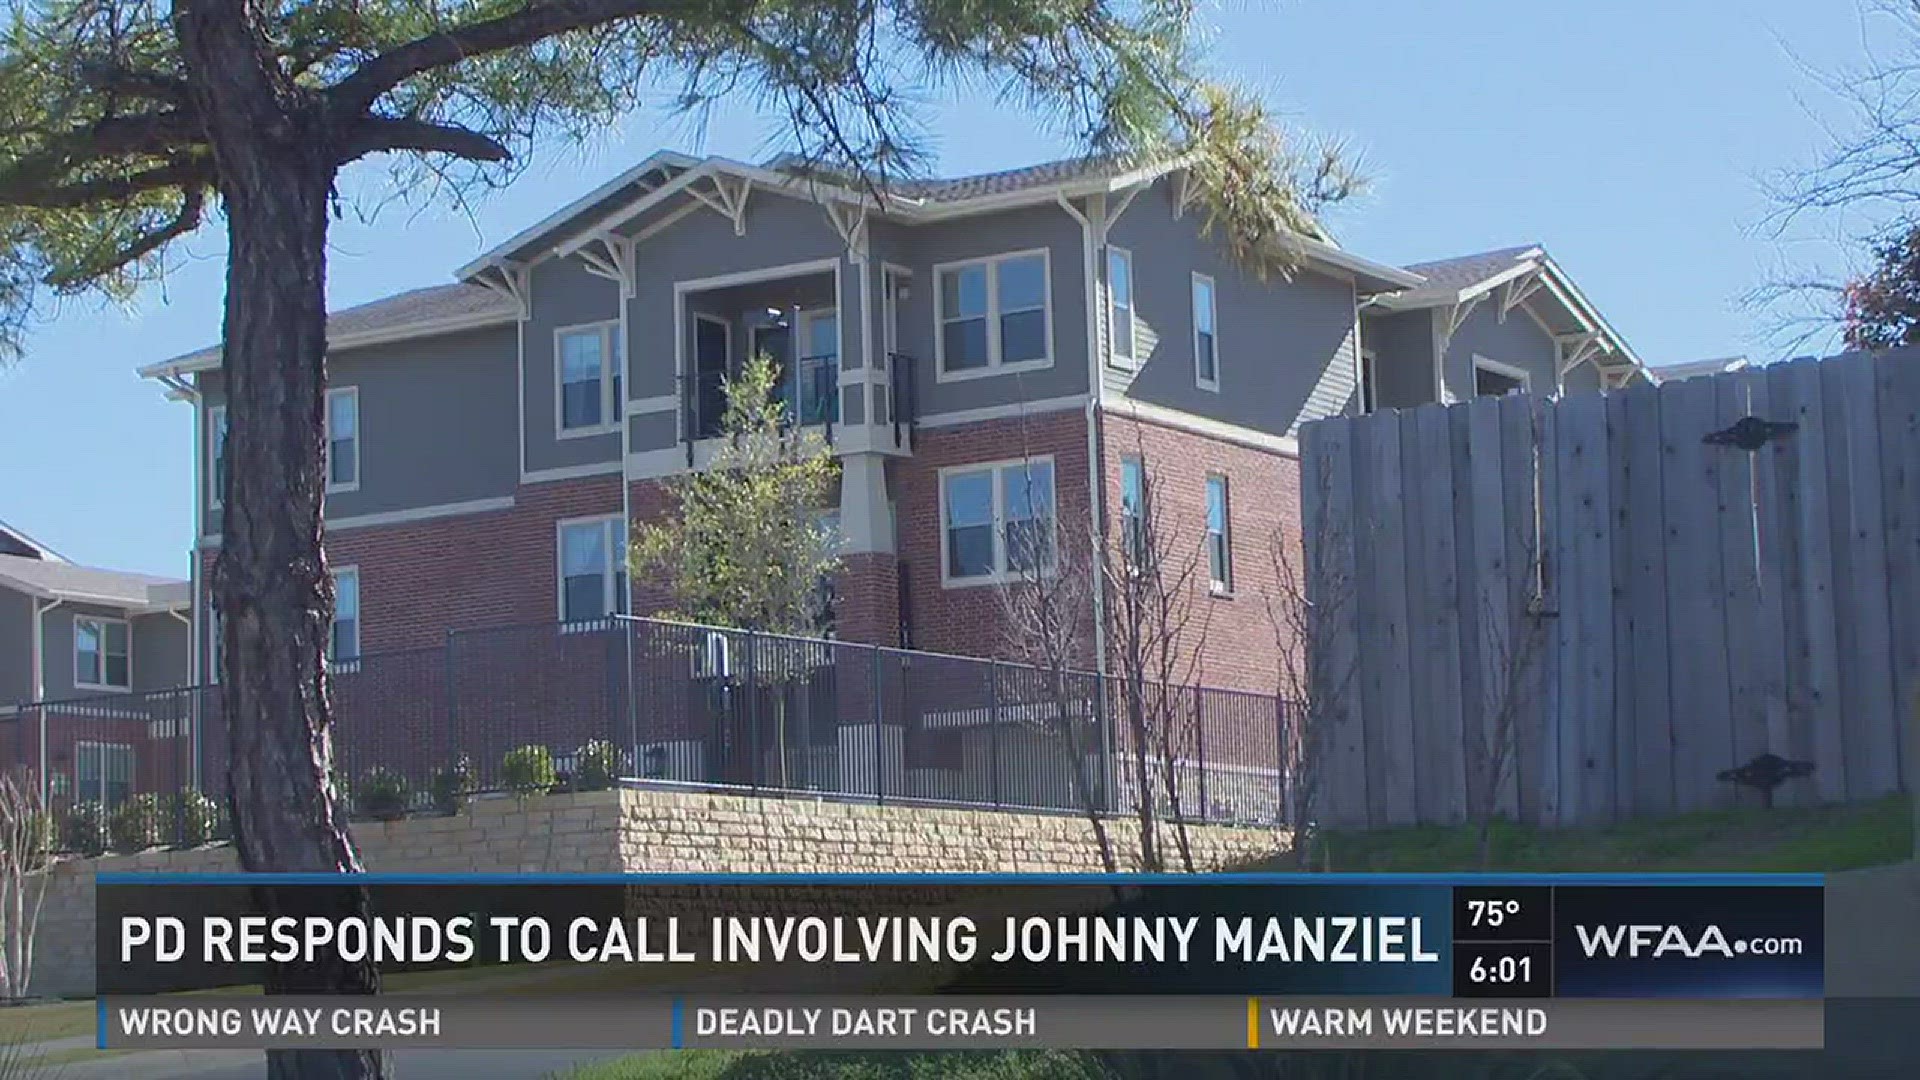 Fort Worth Police responded to an "altercation" involving Johnny Manziel and his ex-girlfriend. Philip Townsend reports.